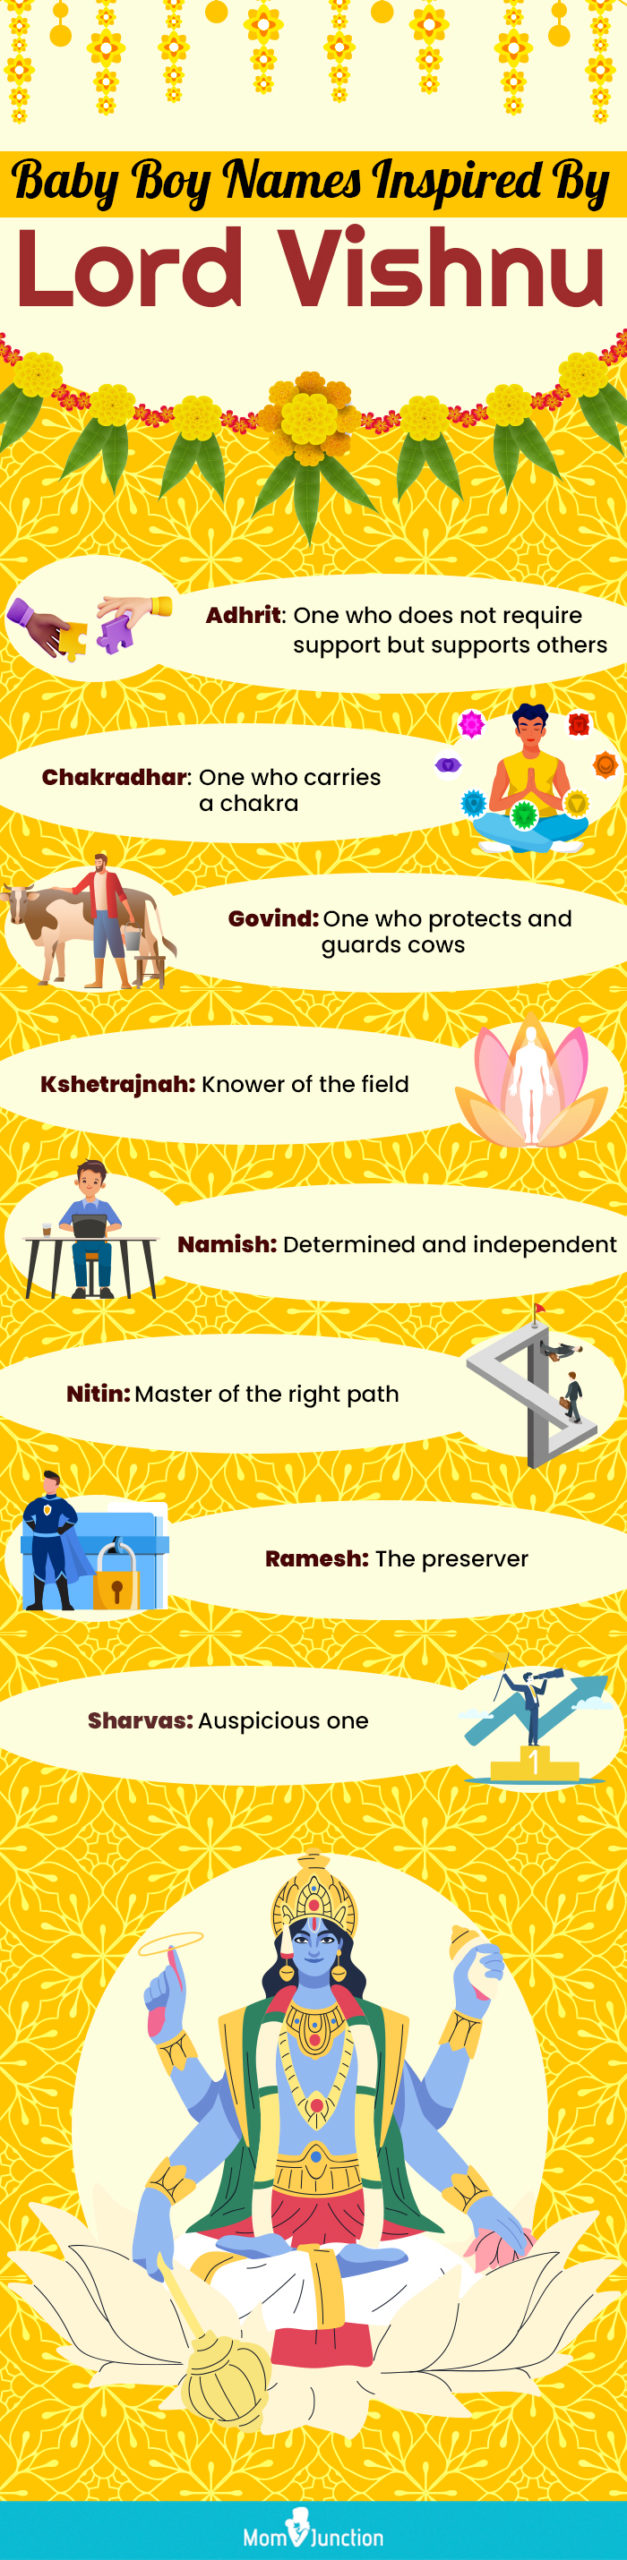 baby boy names inspired by lord vishnu (infographic)